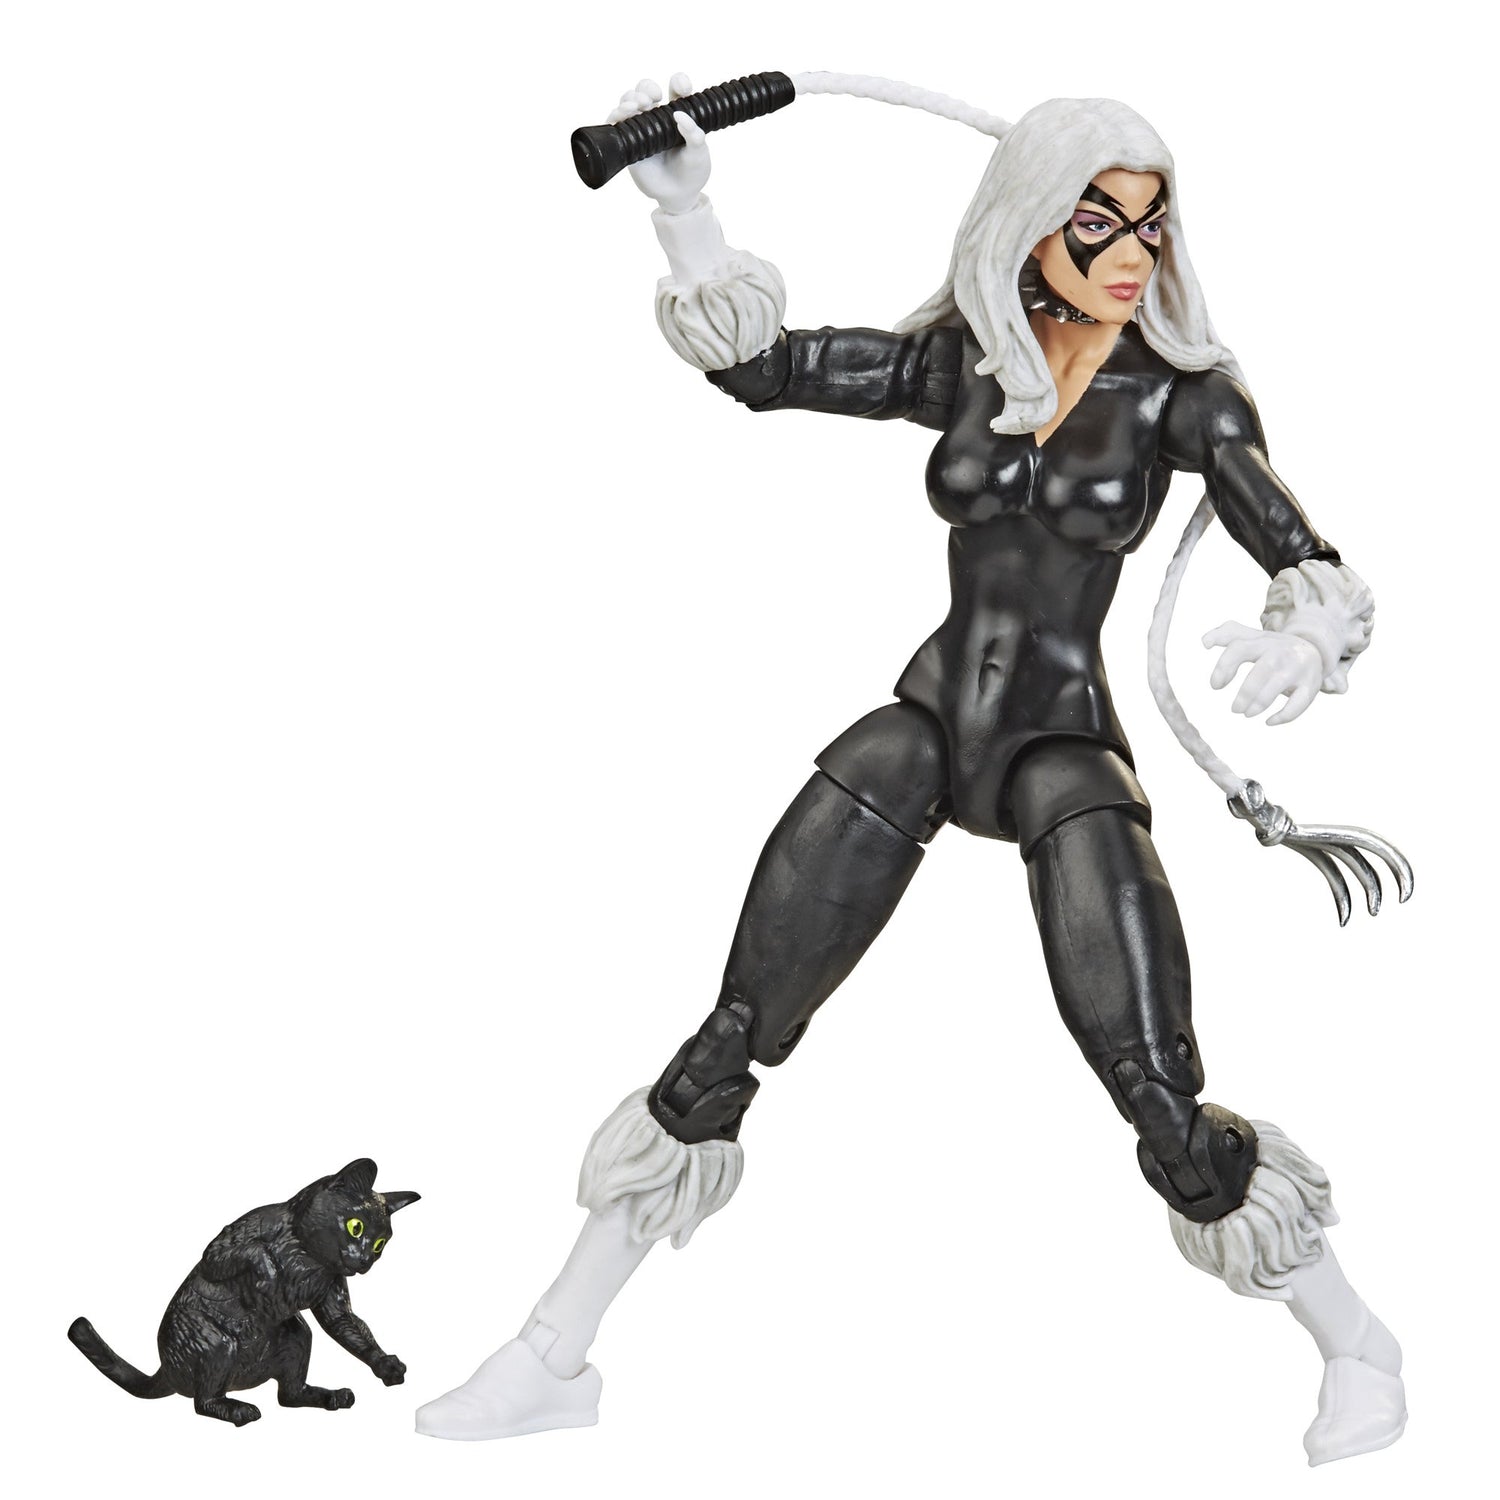 Marvel Legends Retro Collection Felicia Hardy Black Cat figure and accessories